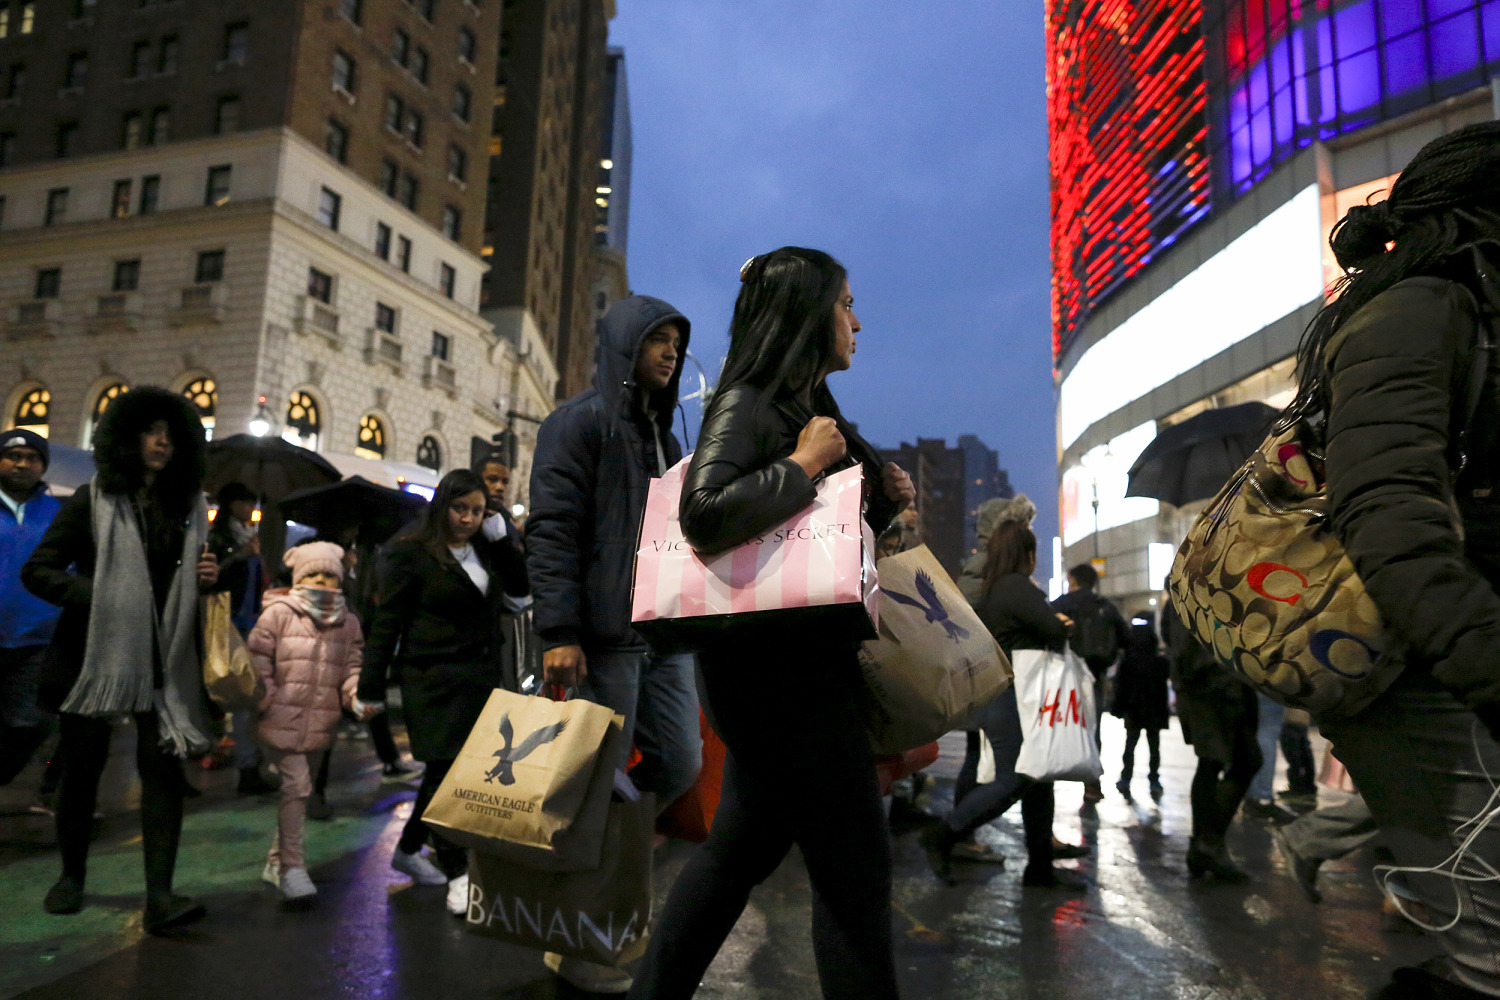 Department stores are still Americans' top place to buy shoes